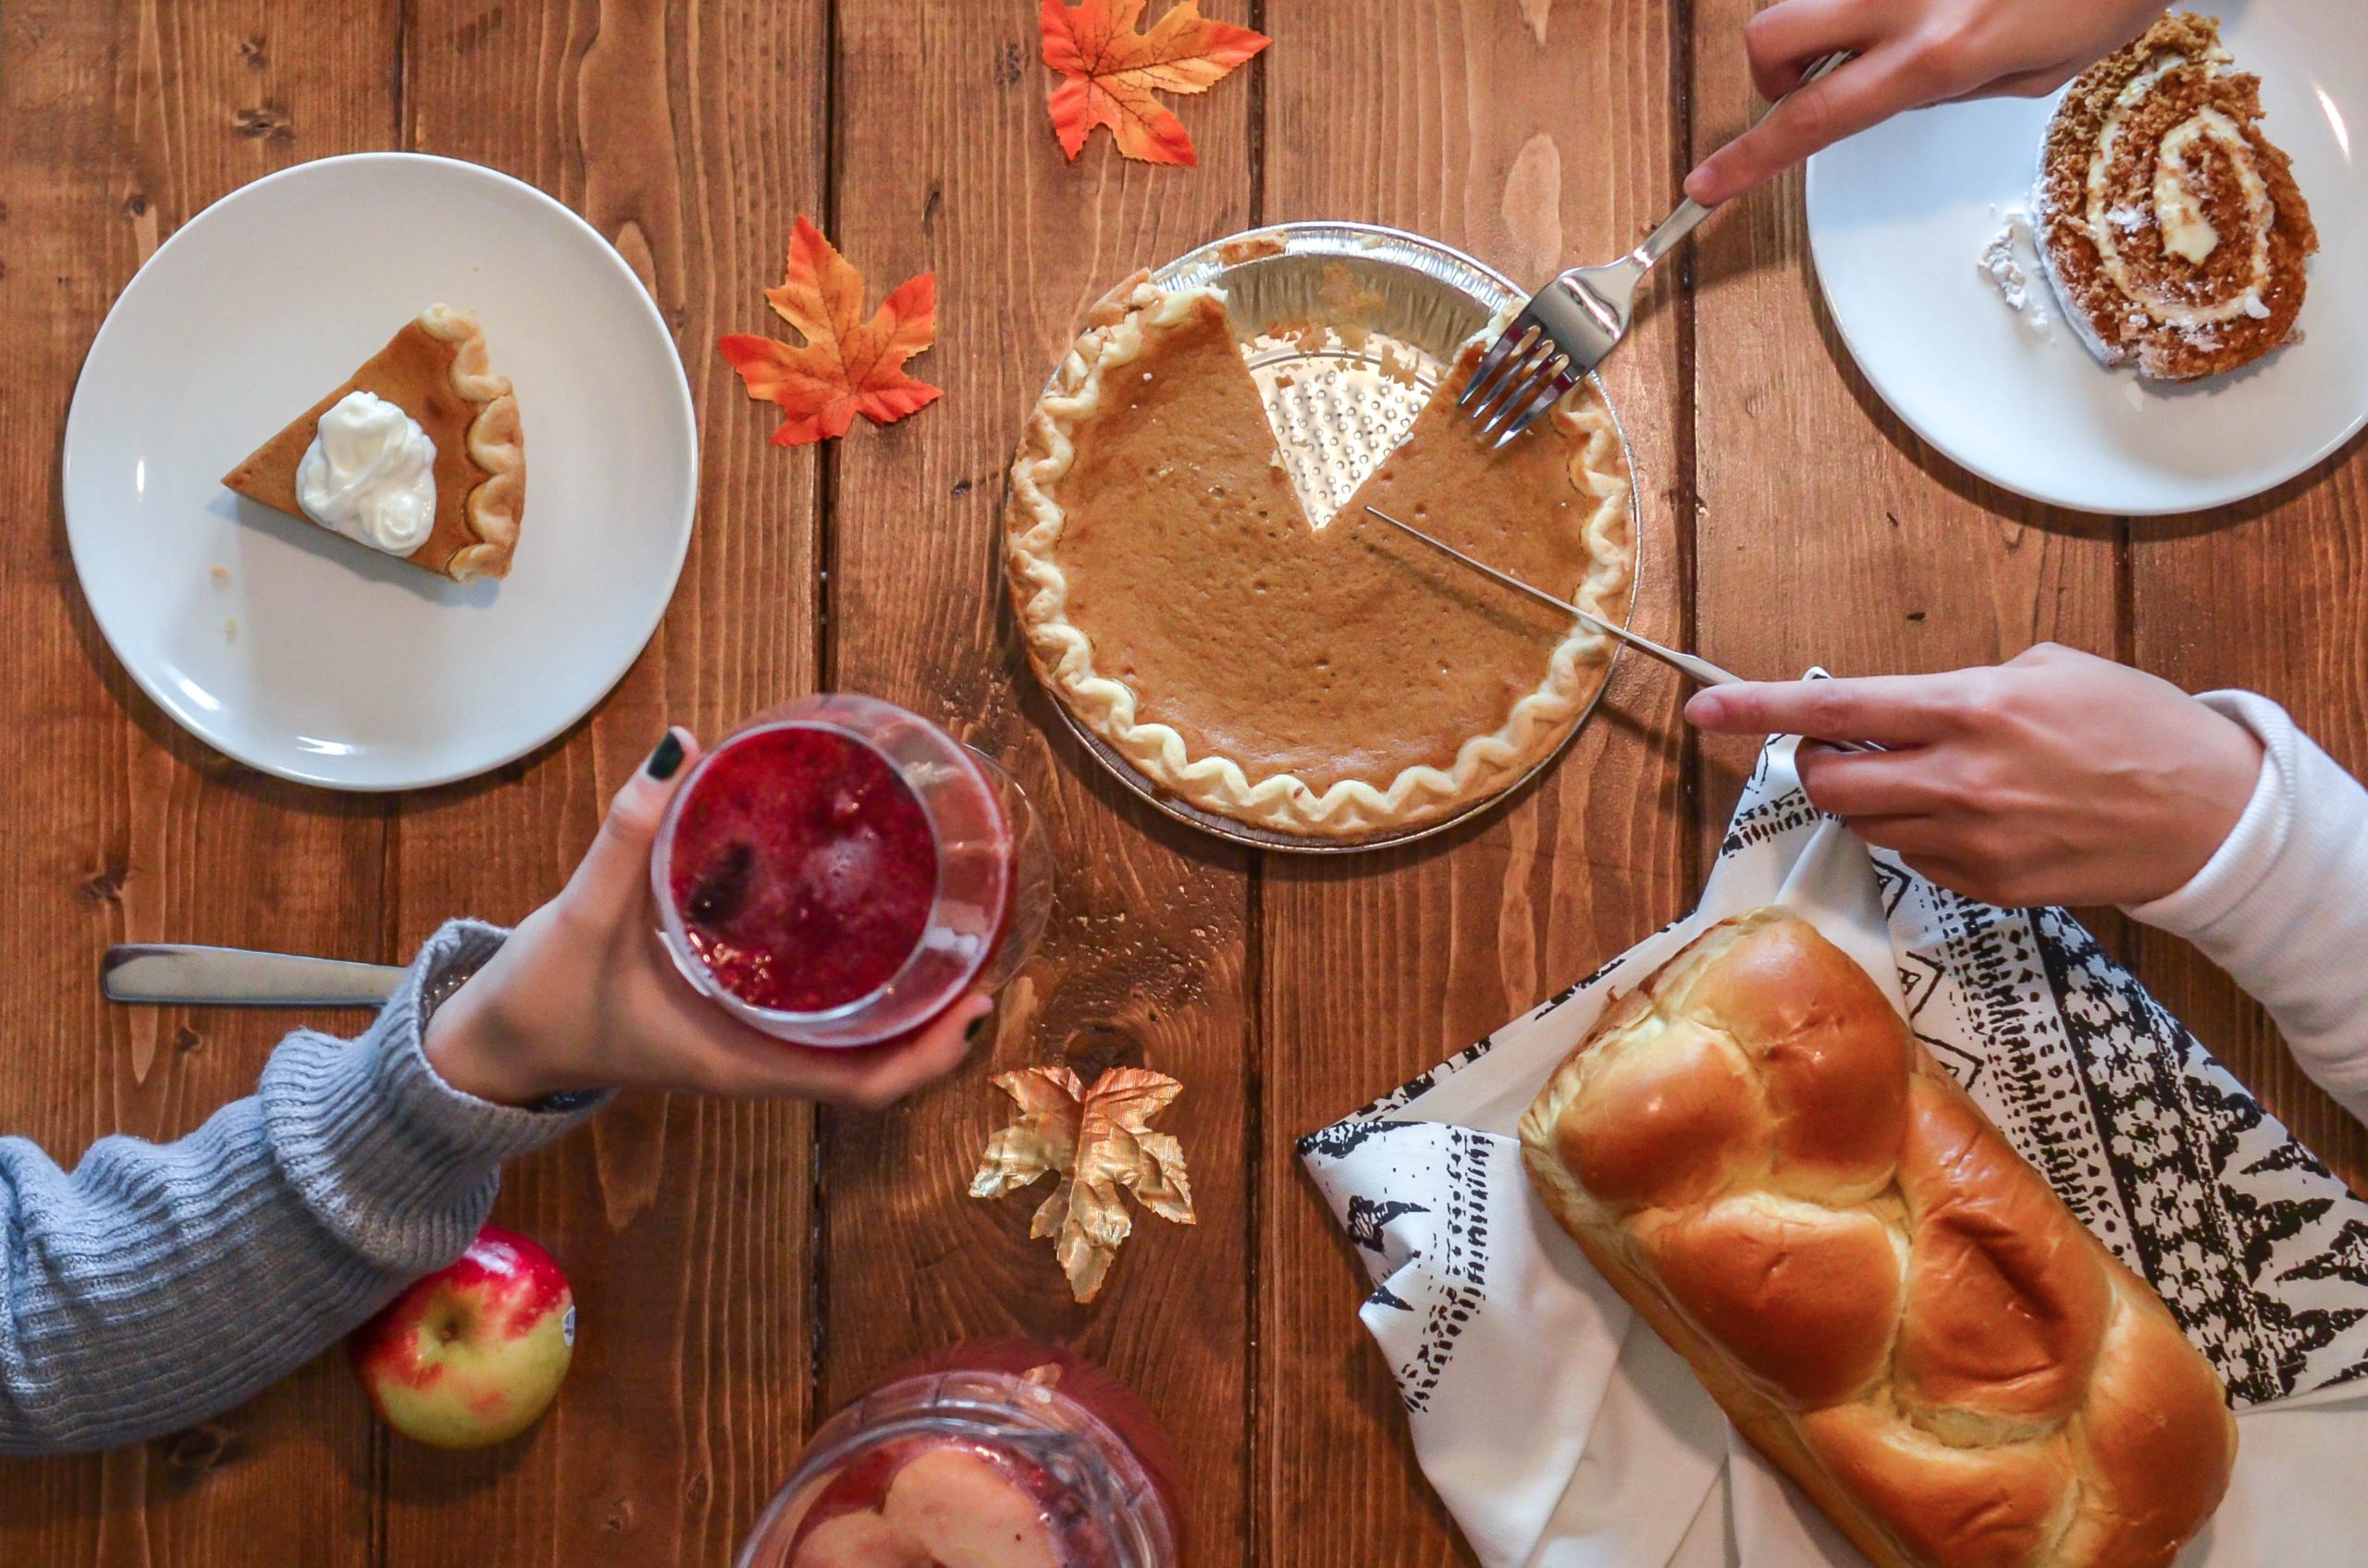 6 tips for a safe Thanksgiving during COVID-19. Roseman Medical Group's Dr. Bruce Morgenstern provides tips for a safe Thanksgiving during COVID-19.